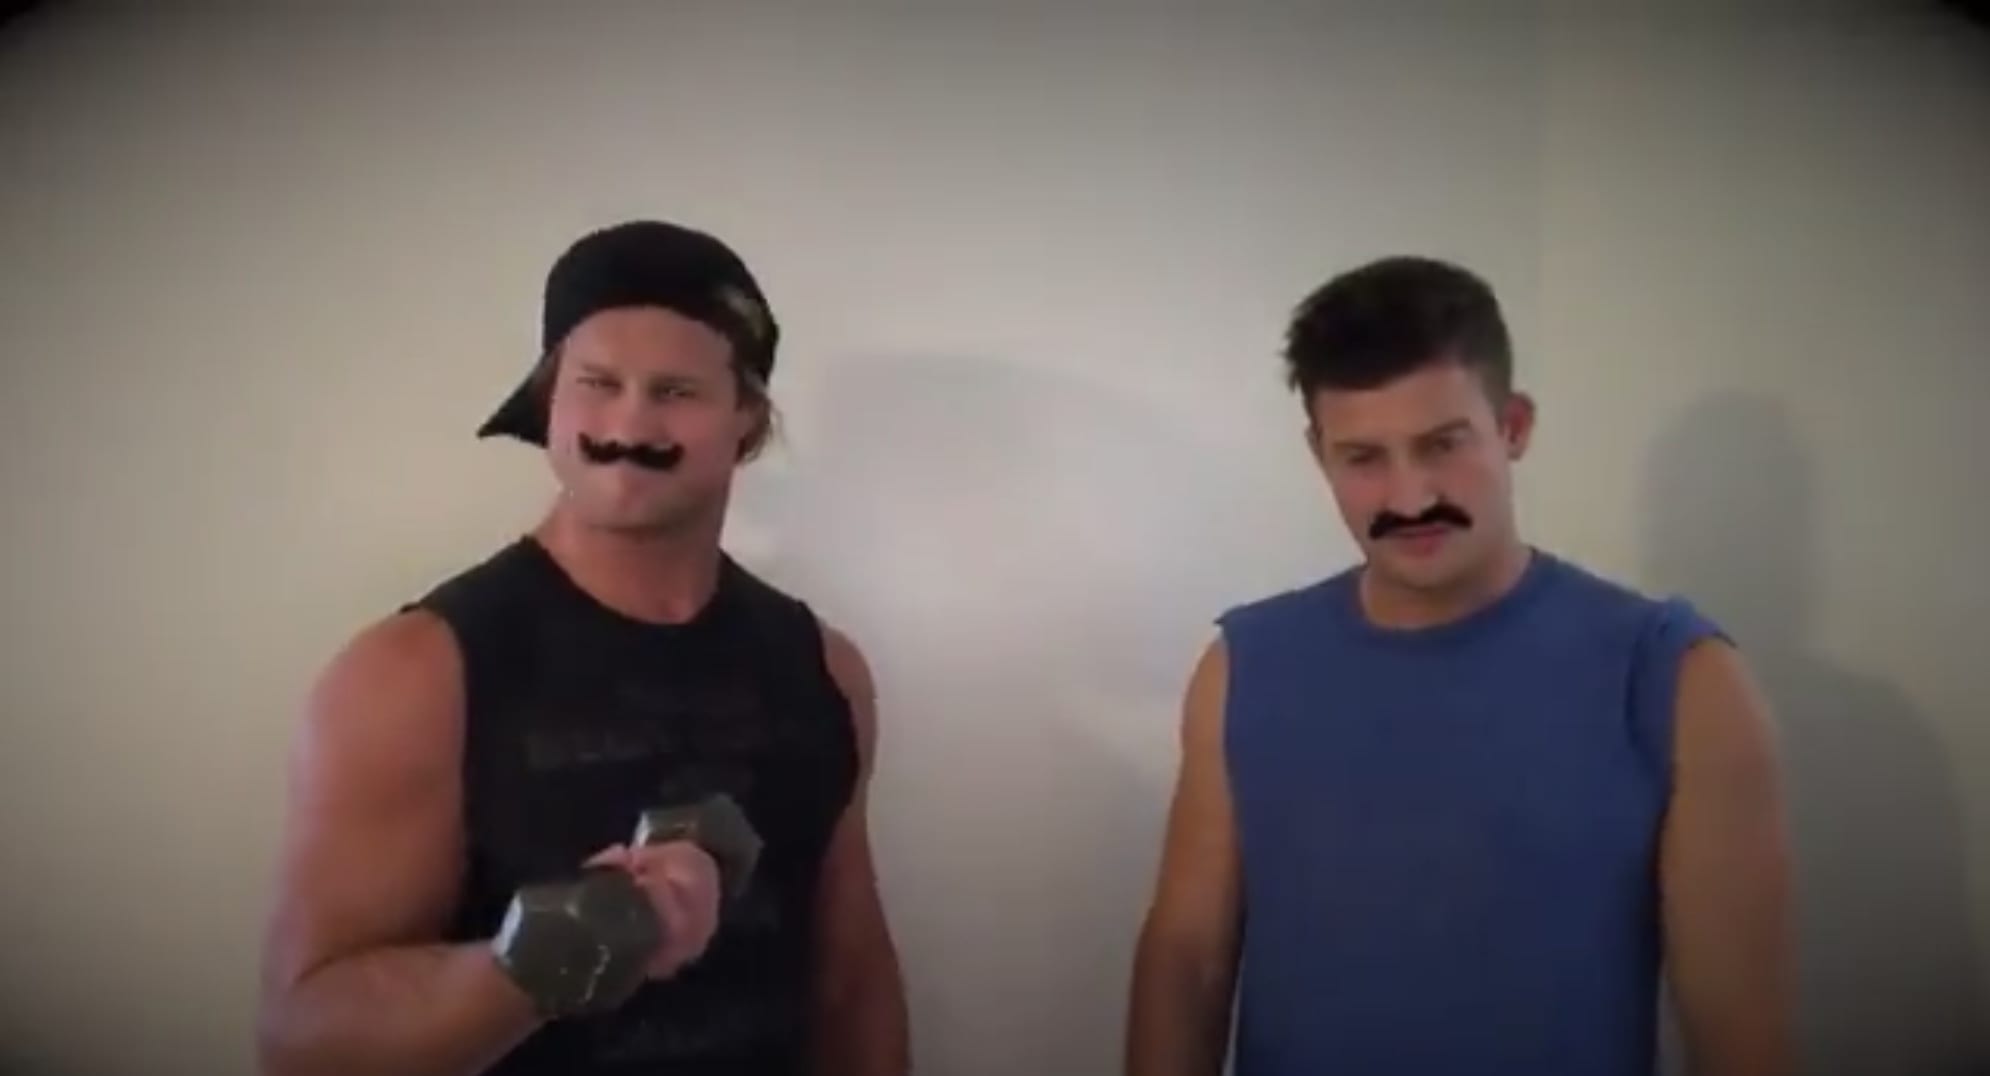 Watch Dolph Ziggler & His Brother’s Hilarious Online Commercial